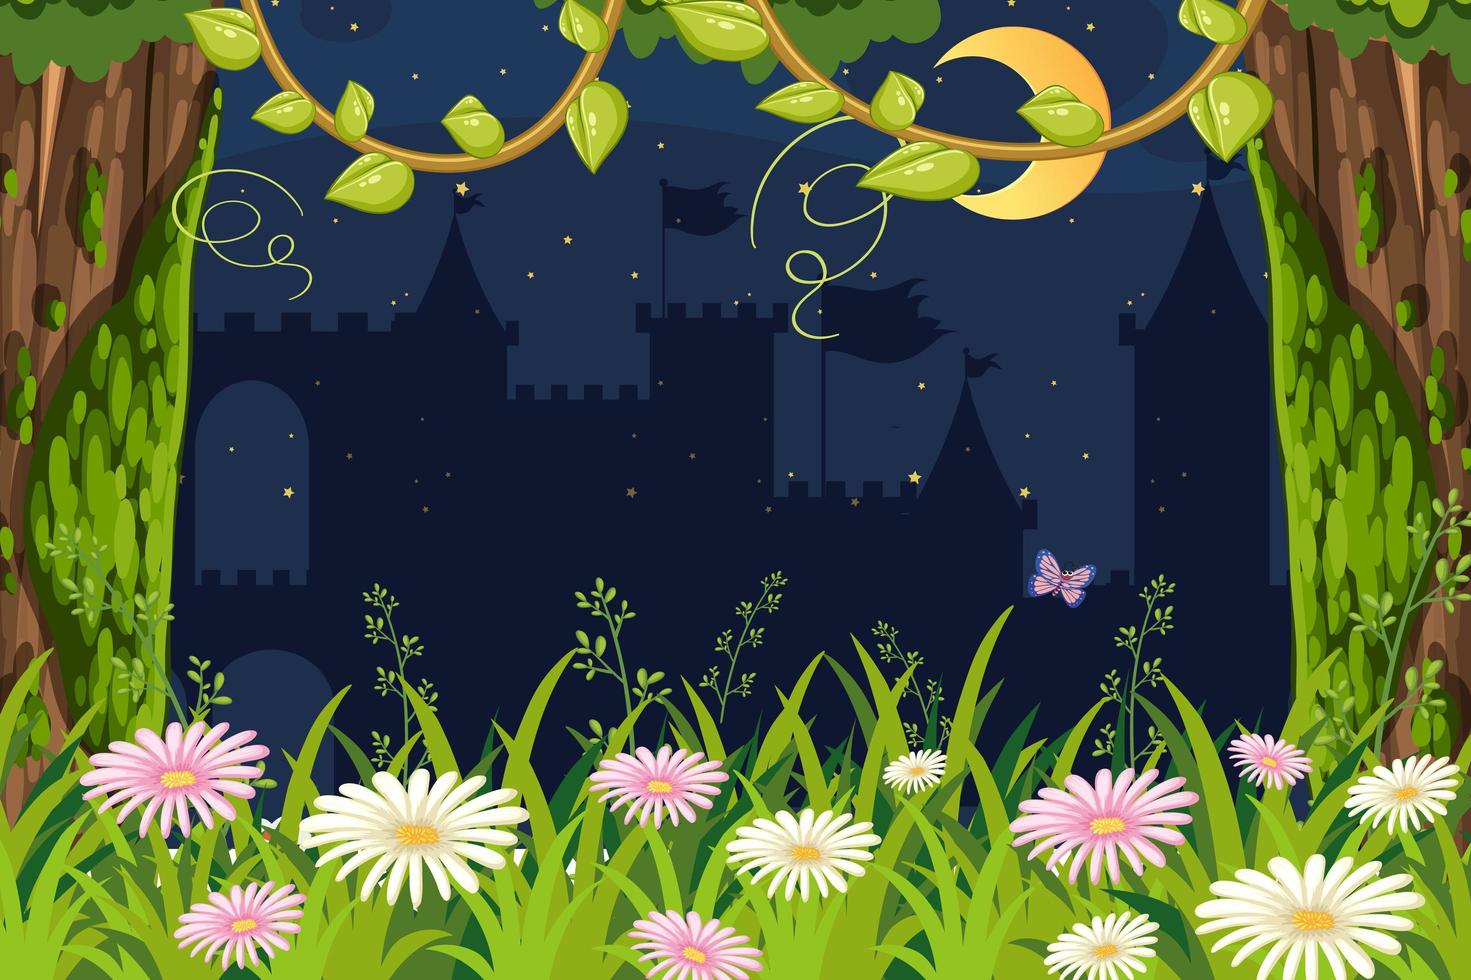 Silhouette of castle at night with forest vector